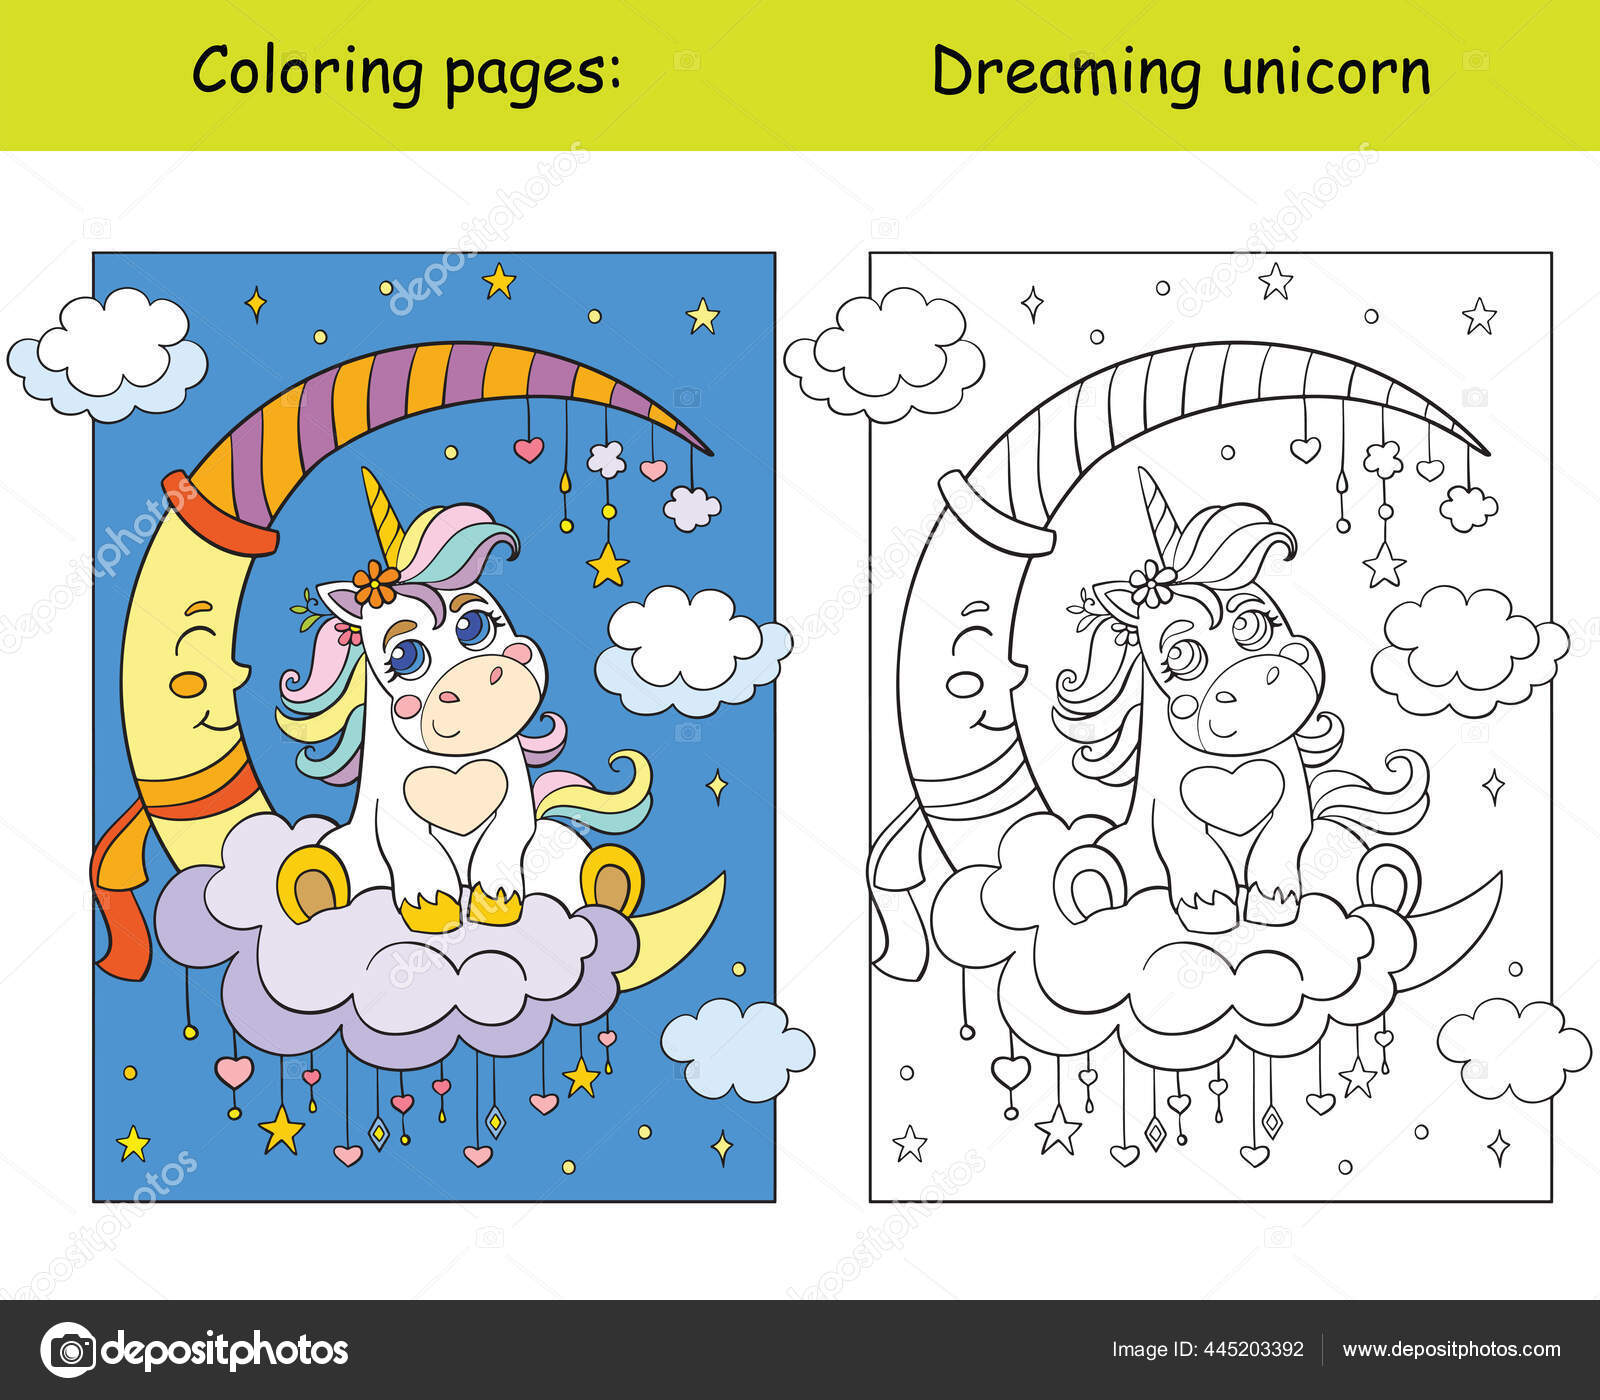 moon game coloring pages